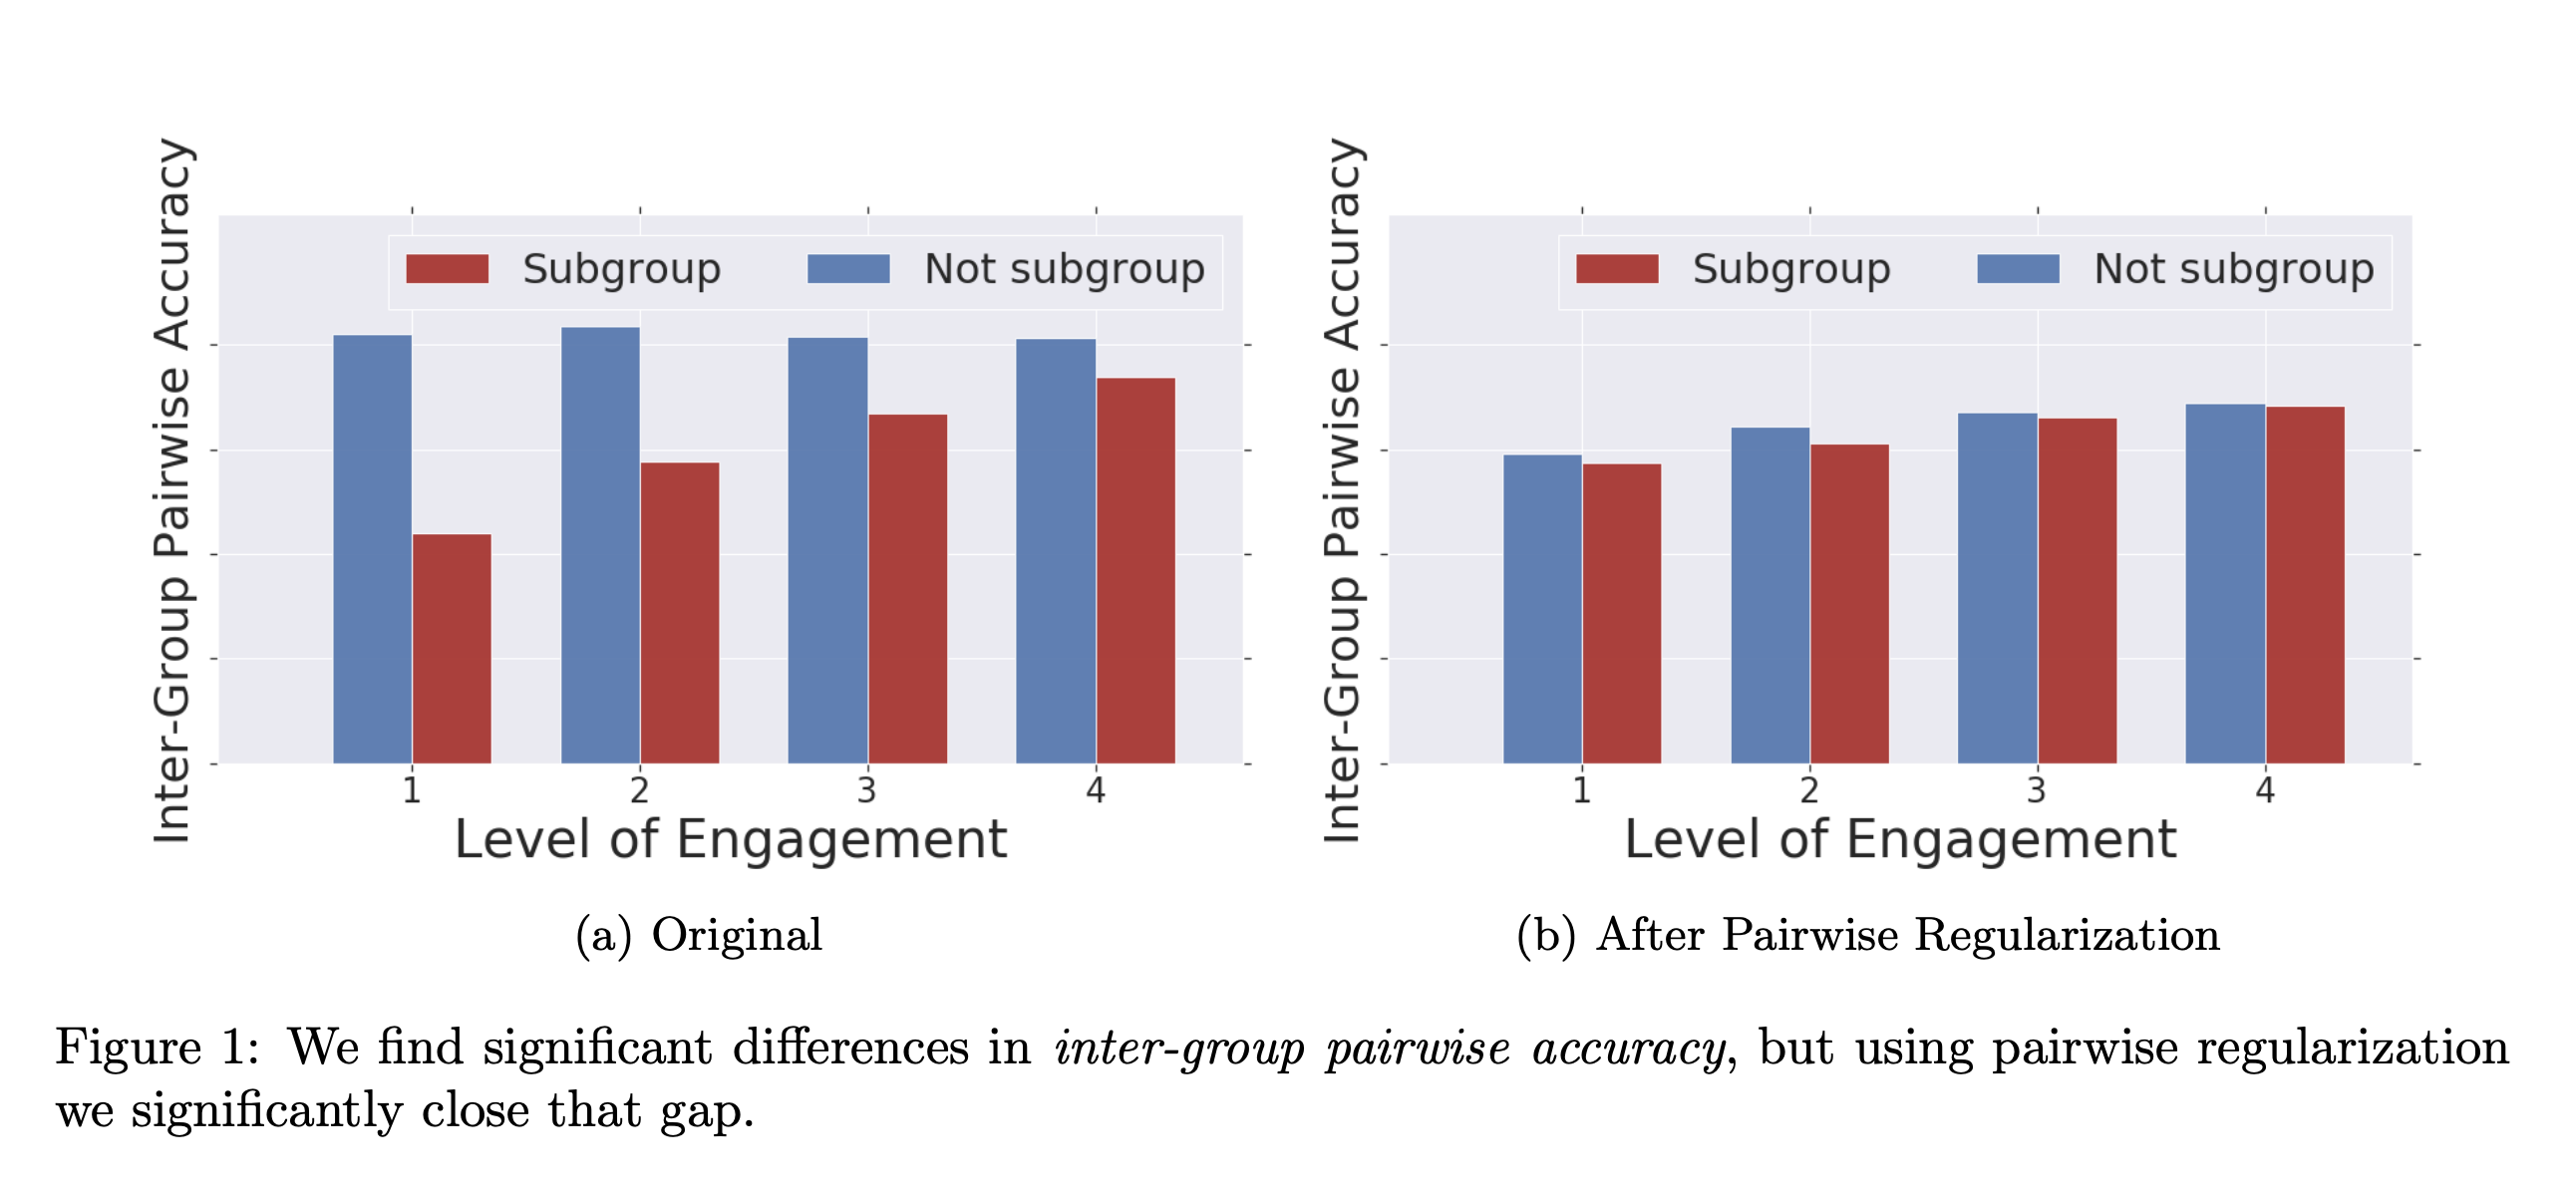 We find significant differences in inter-group pairwise accuracy, but using pairwise regularization we significantly close that gap